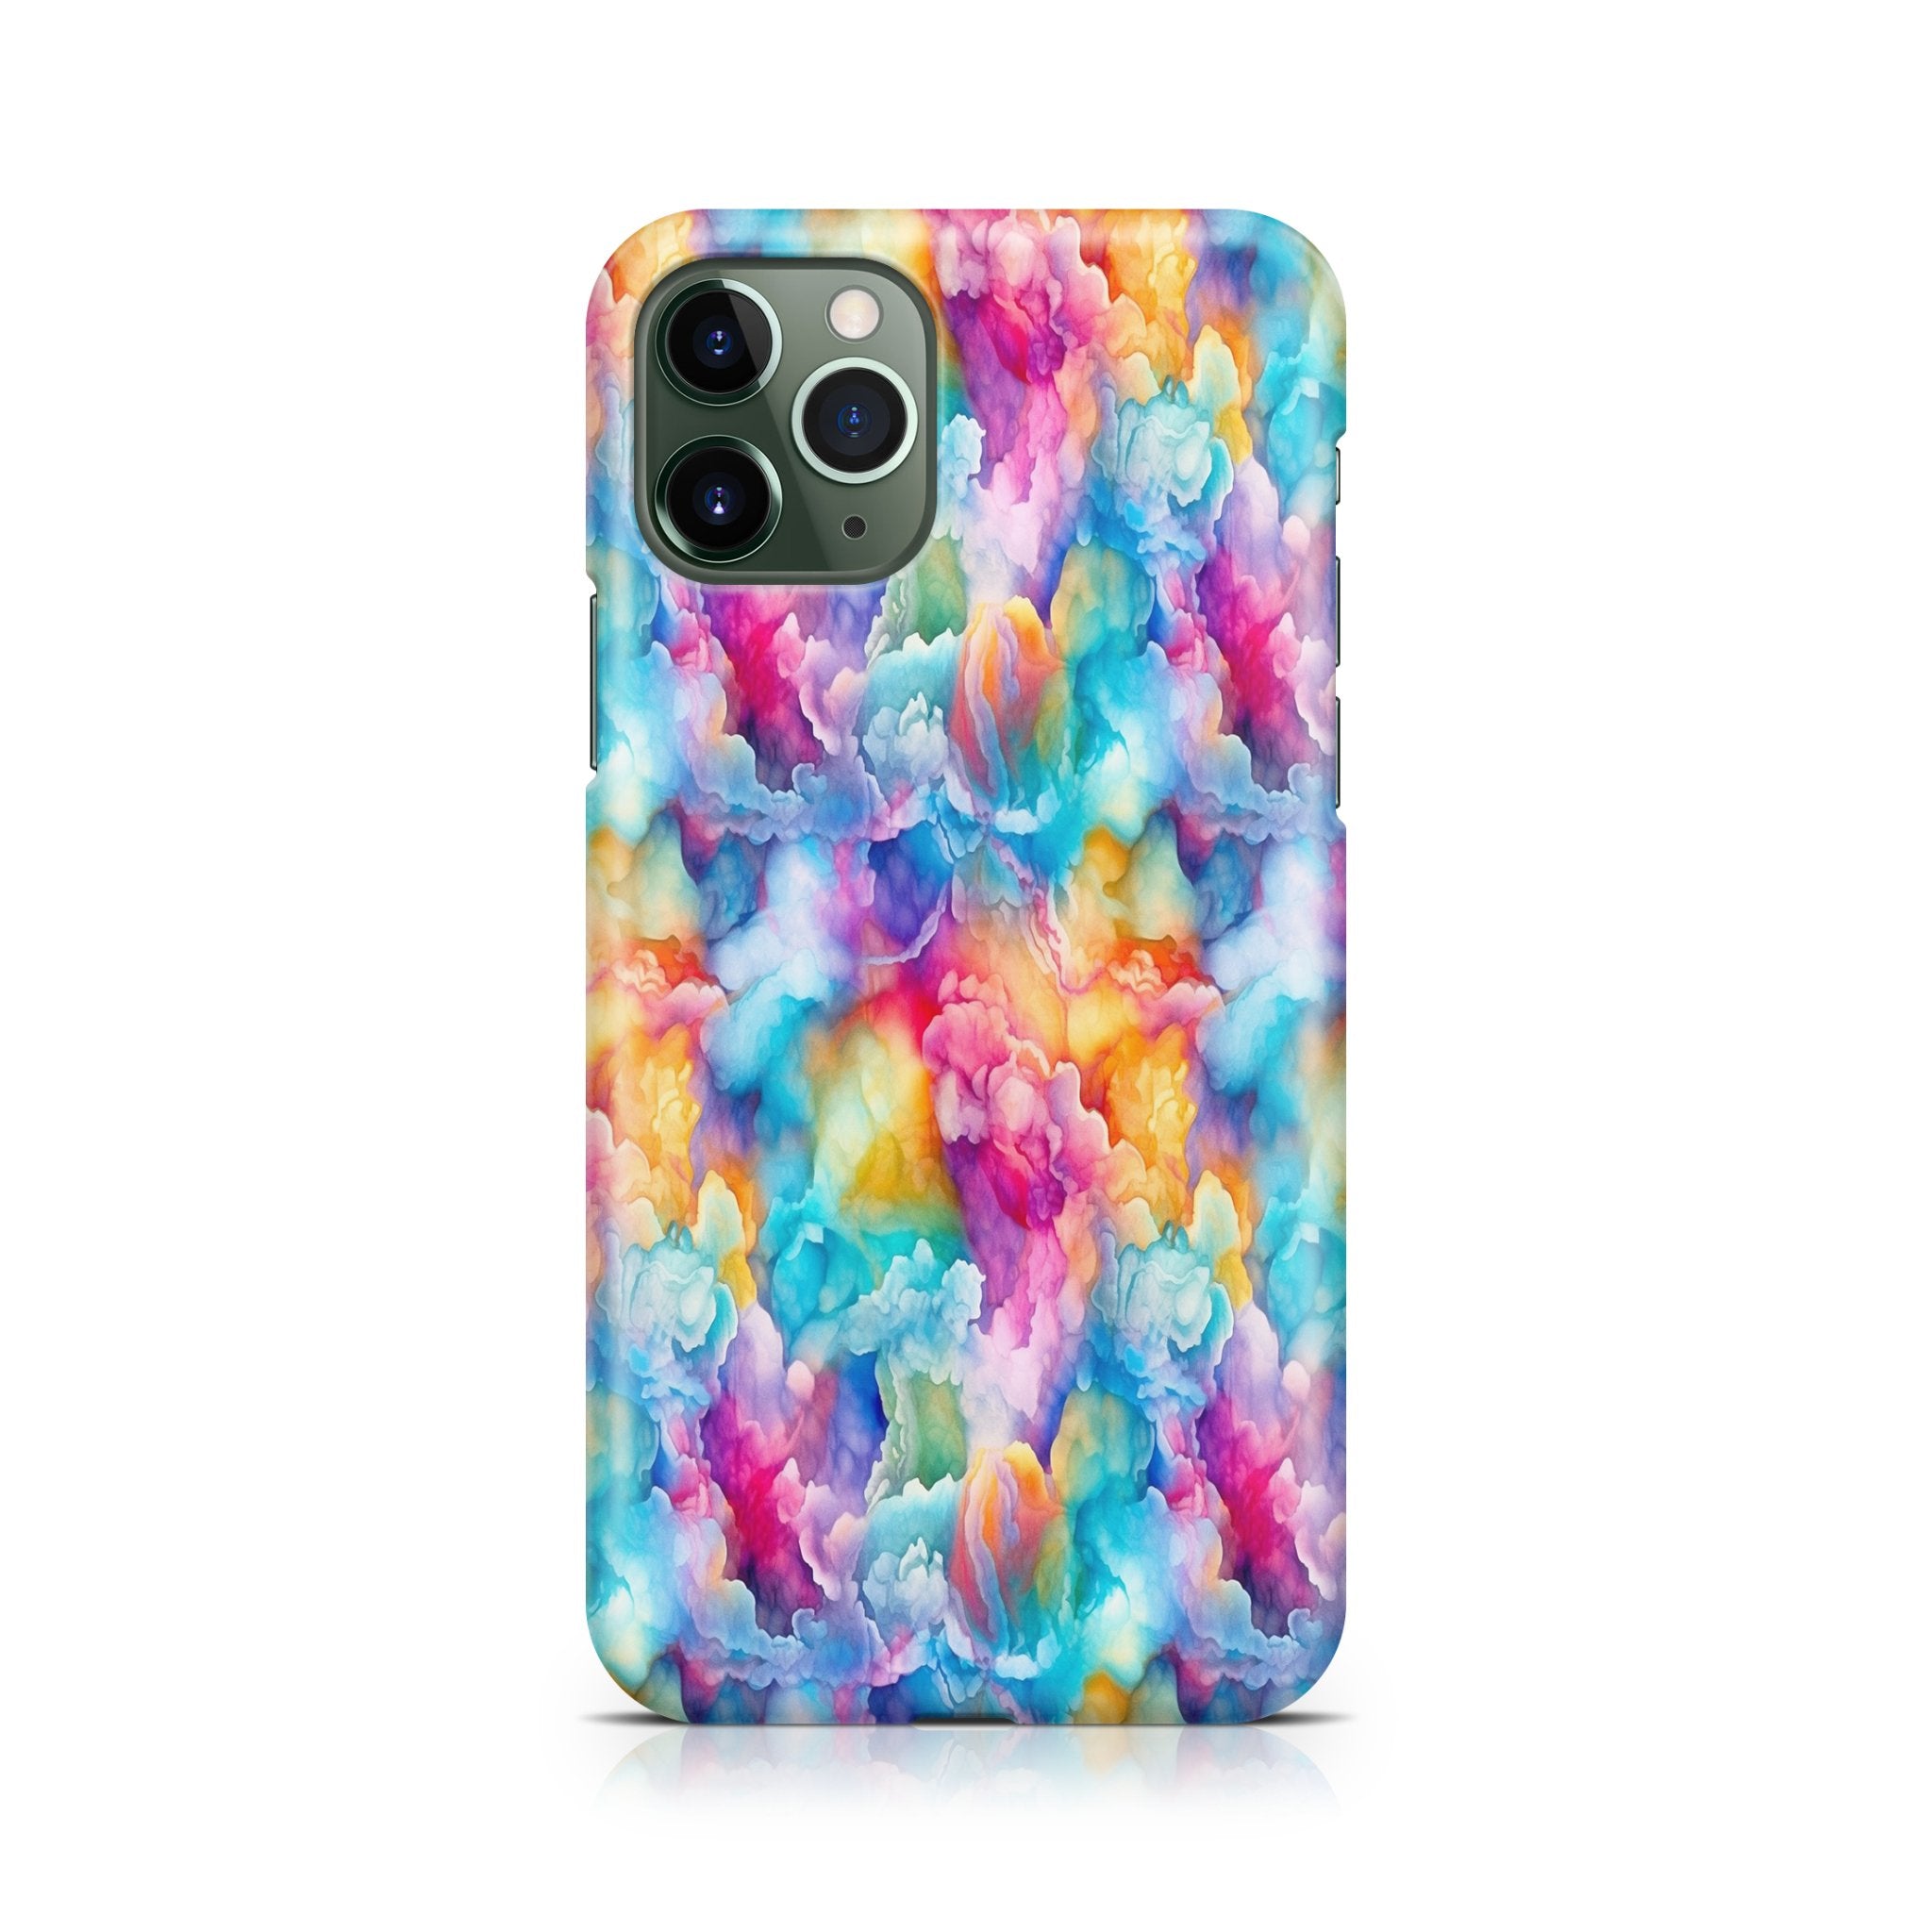 Cloudy Rainbow - iPhone phone case designs by CaseSwagger